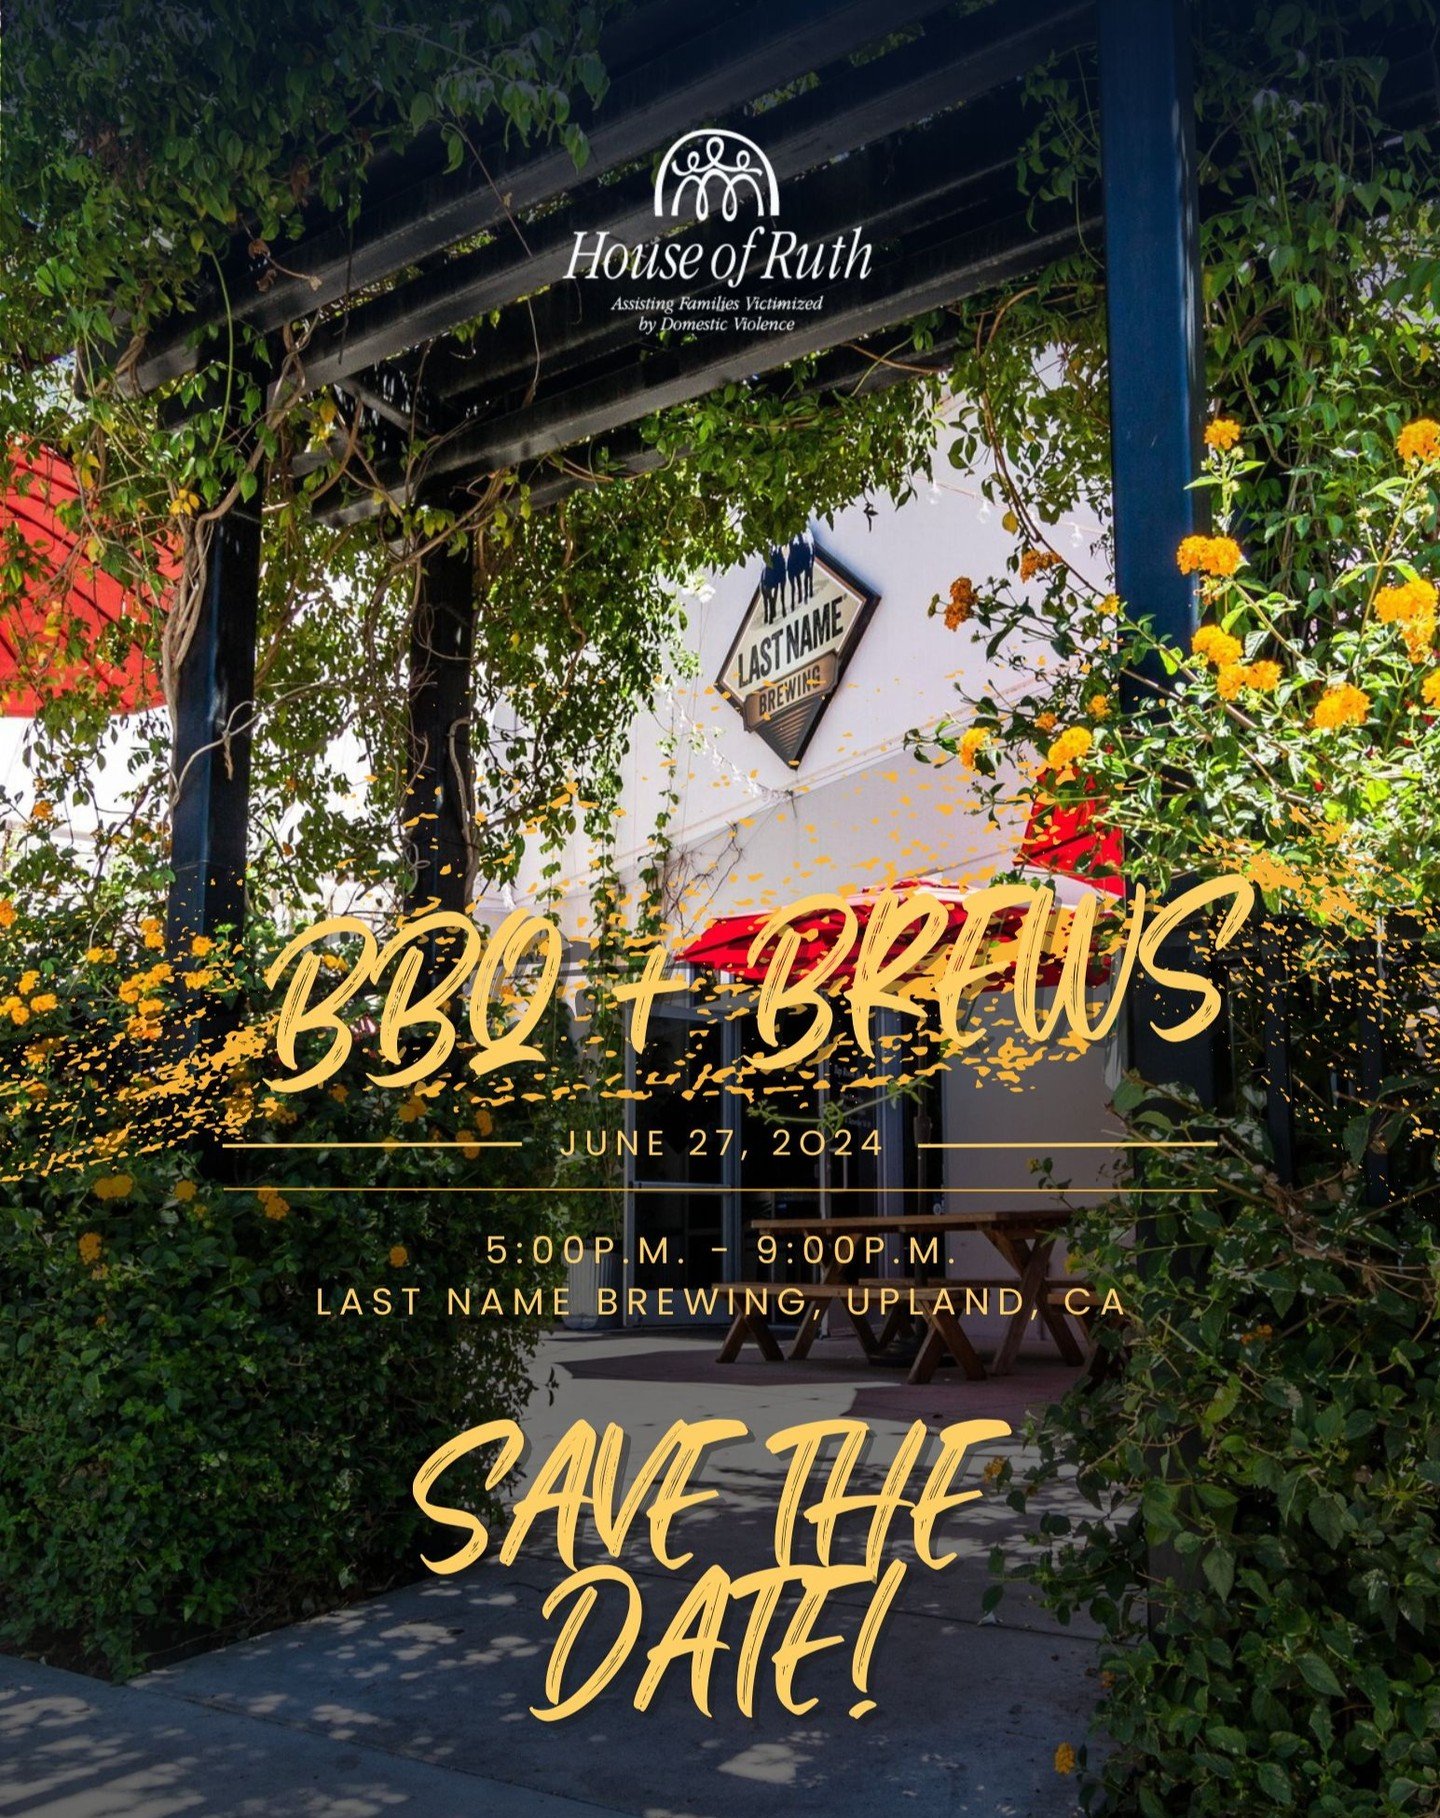 Save the date! The return of our highly anticipated BBQ + Brews fundraiser is coming on June 27, 2024 from 5:00p.m. - 9:00p.m! Join us for good food, refreshing drinks, games, and more to benefit survivors of domestic violence and their families!

#b